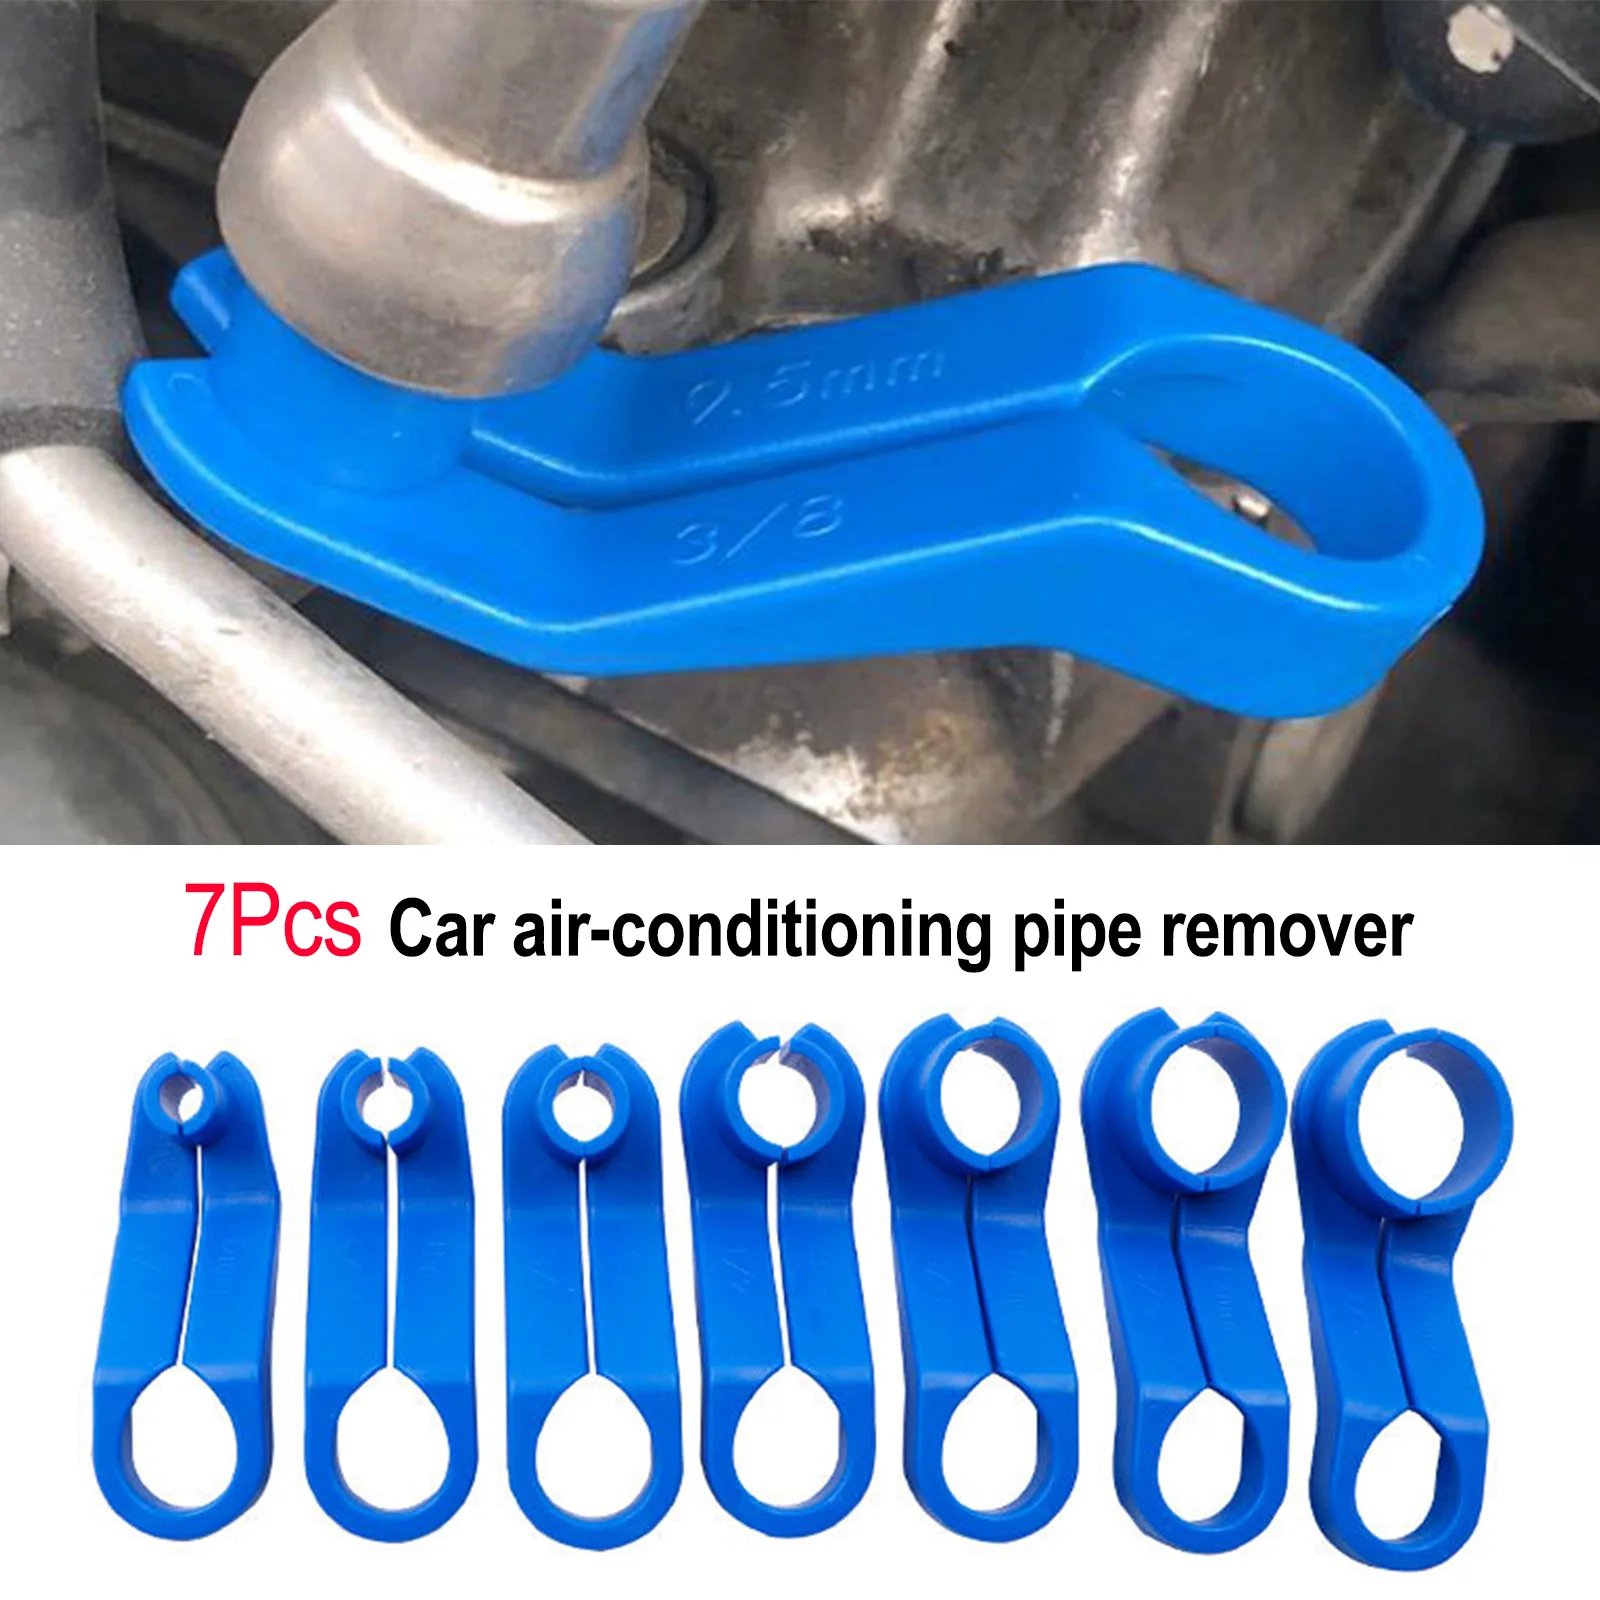 

AC Fuel Line Disconnect Tools Air Conditioning Tool Car Quick Disassemble Tool Kit Repair Tools Replacement for Ford Chrysler